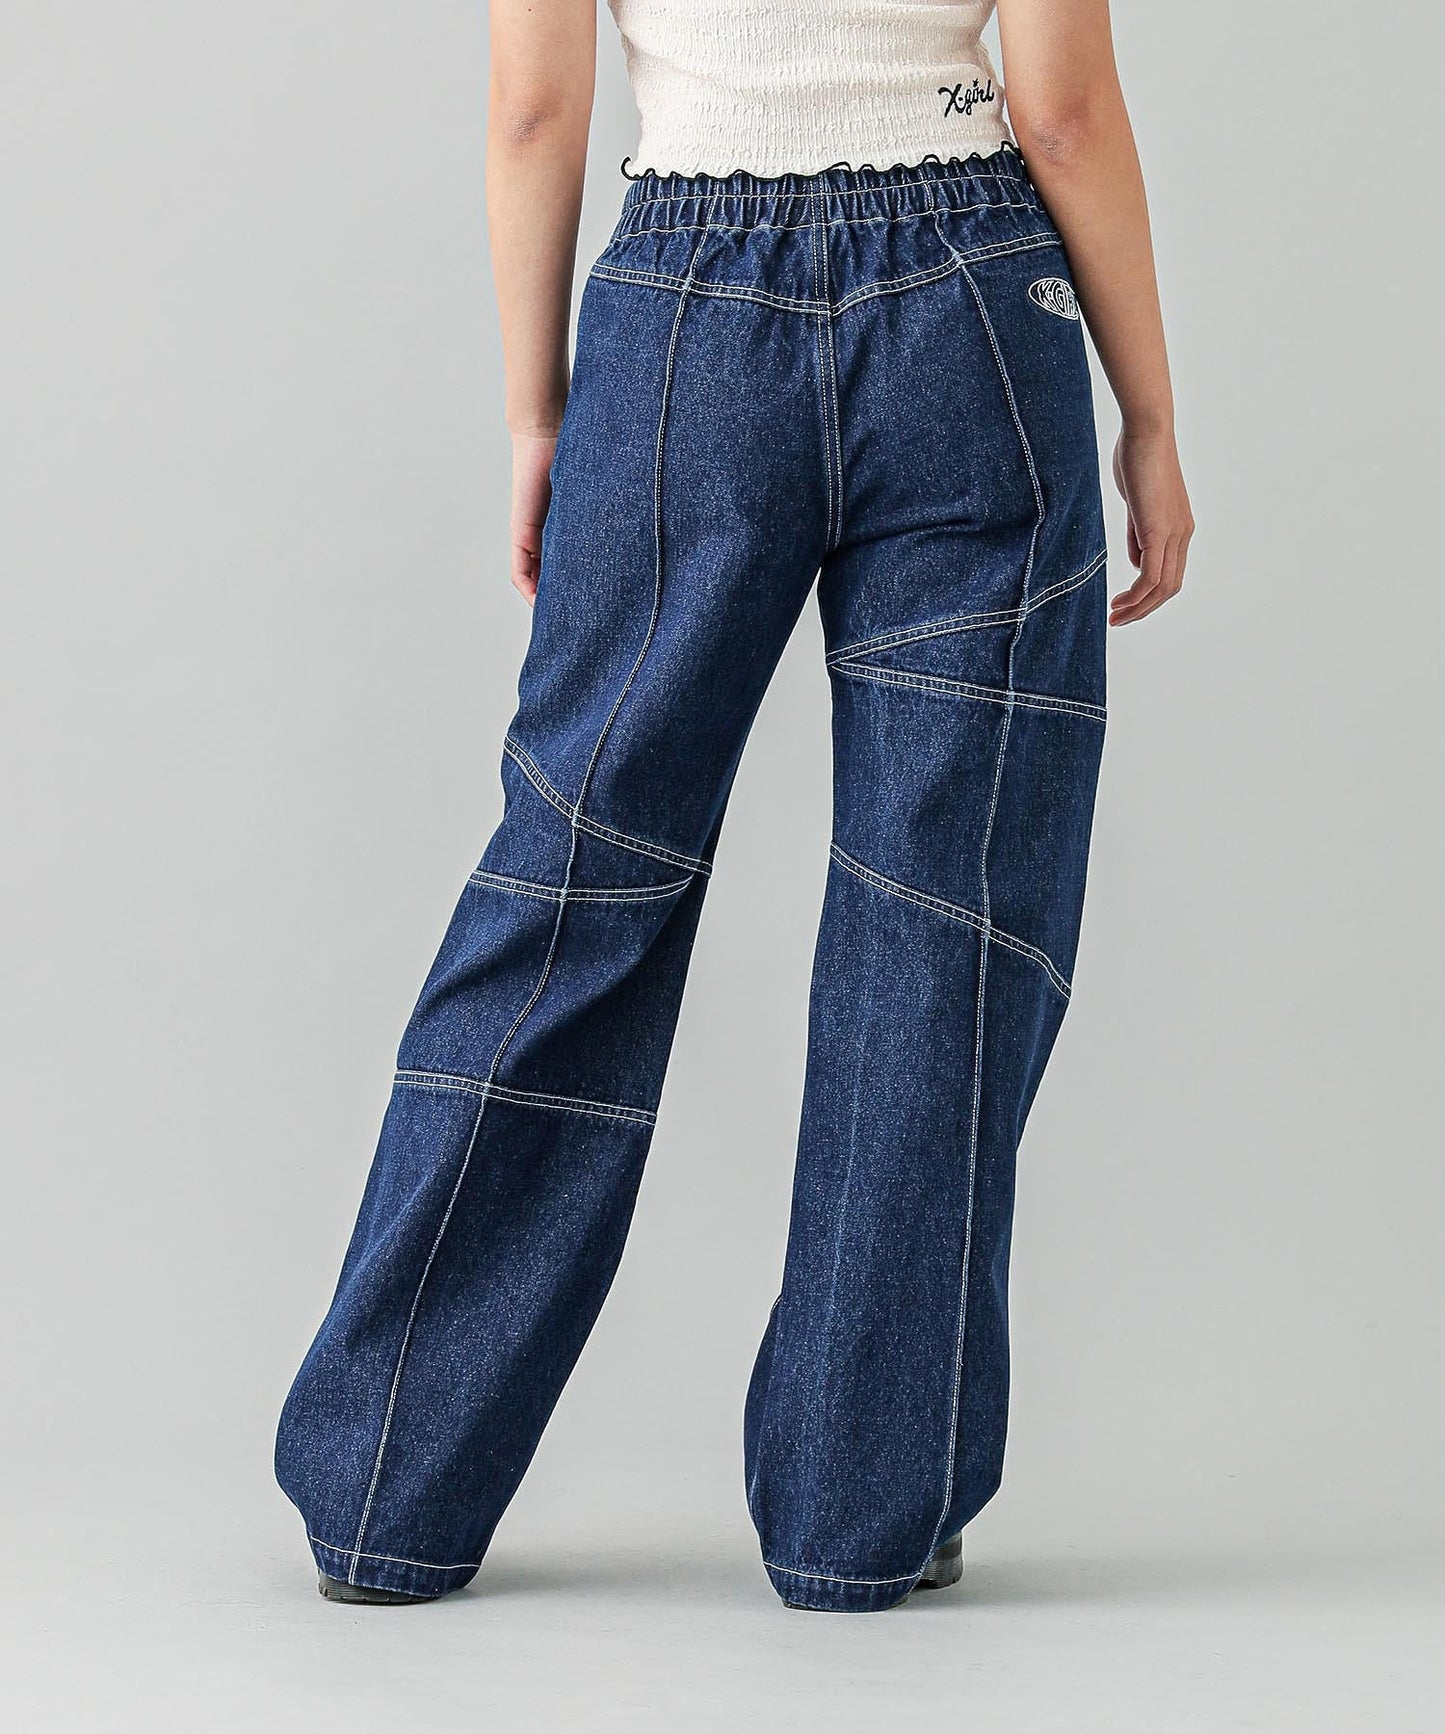 CONTRAST STITCH EASY PANTS